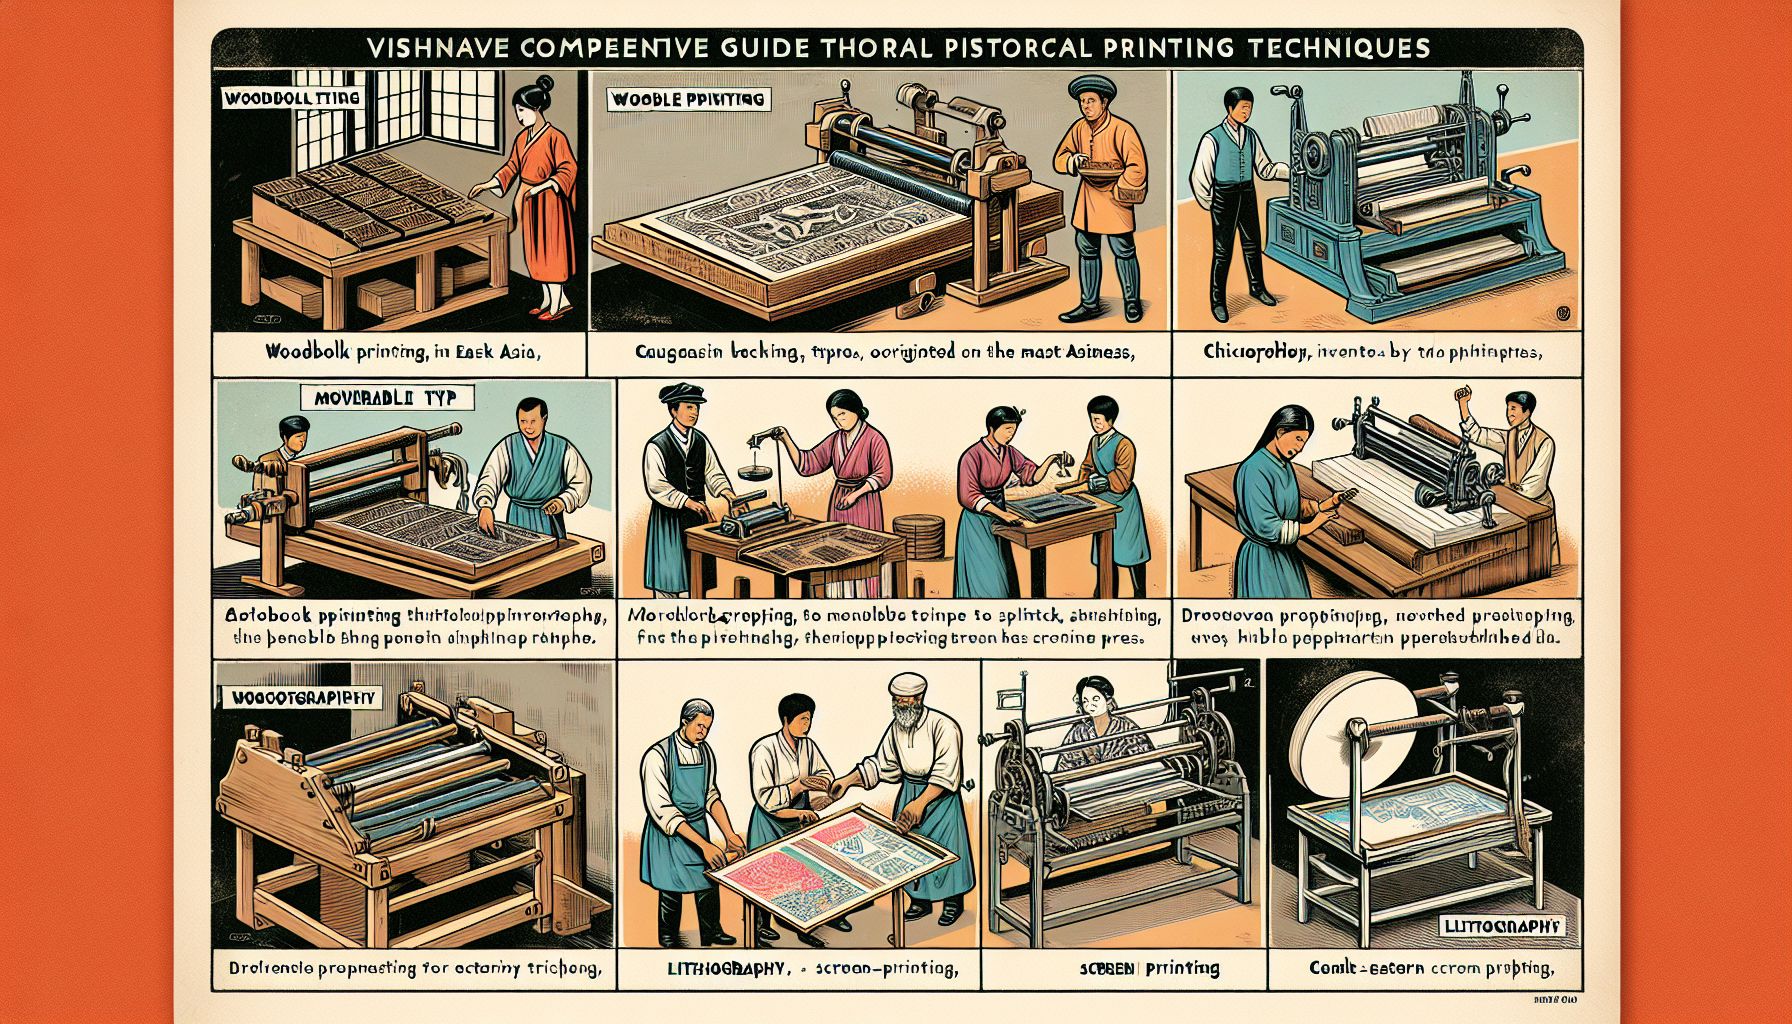 A Comprehensive Guide to Printing Techniques